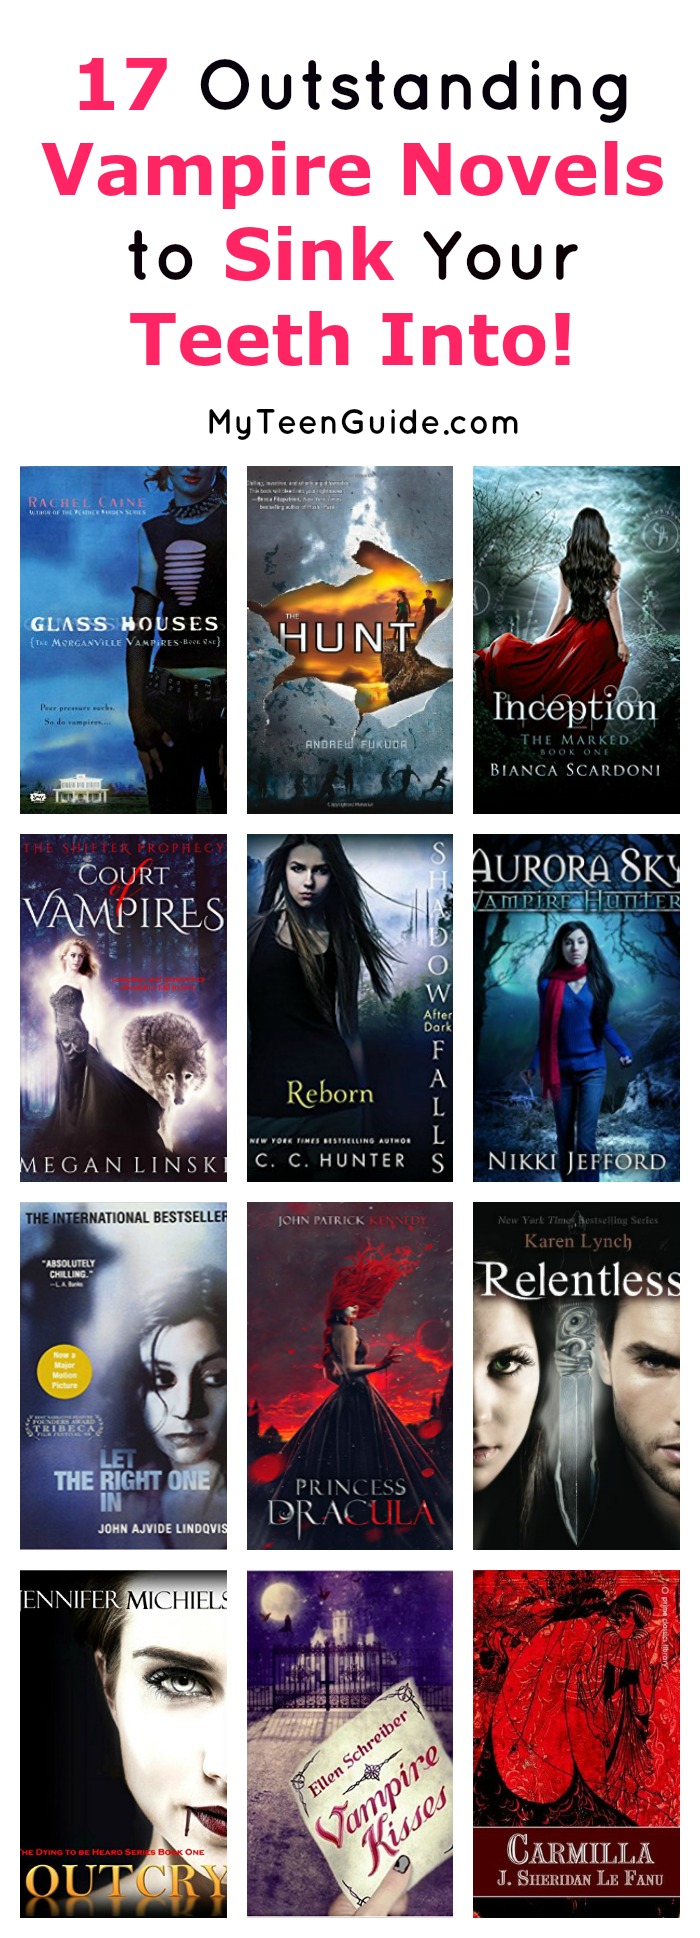 Looking for new vampire novels to sink your teeth into? Check out these 17 amazing books that you won’t be able to put down!